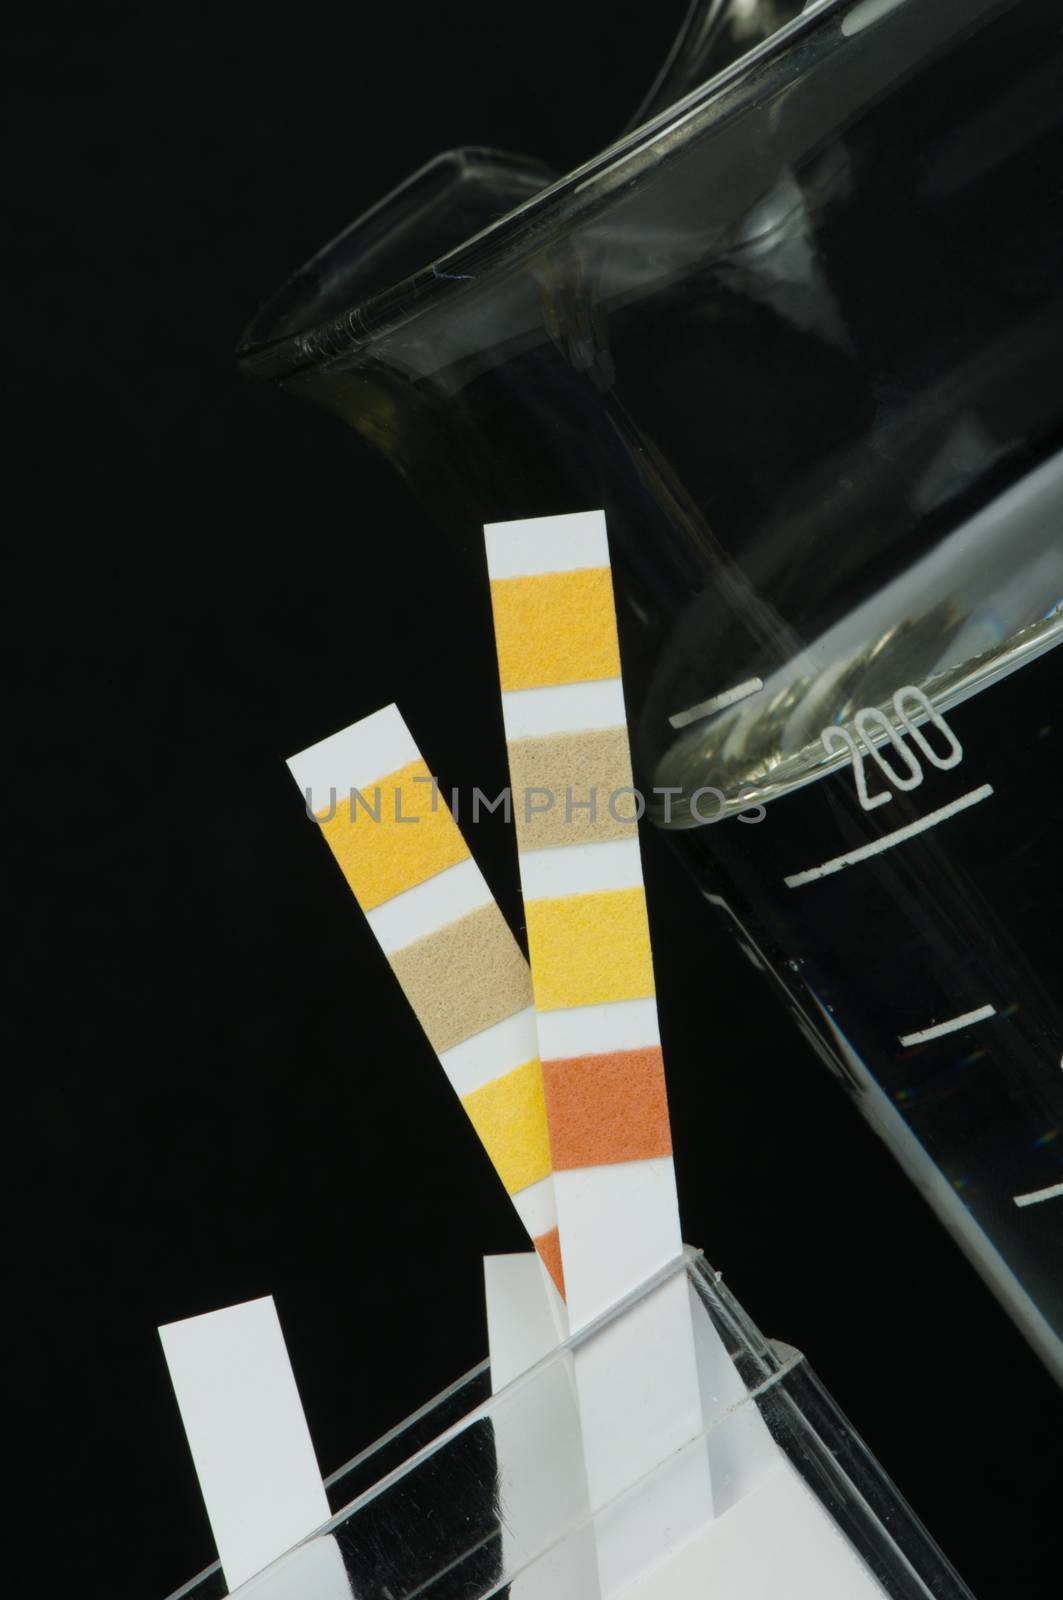 Litmus strips for measurement of acidity.Beaker with water